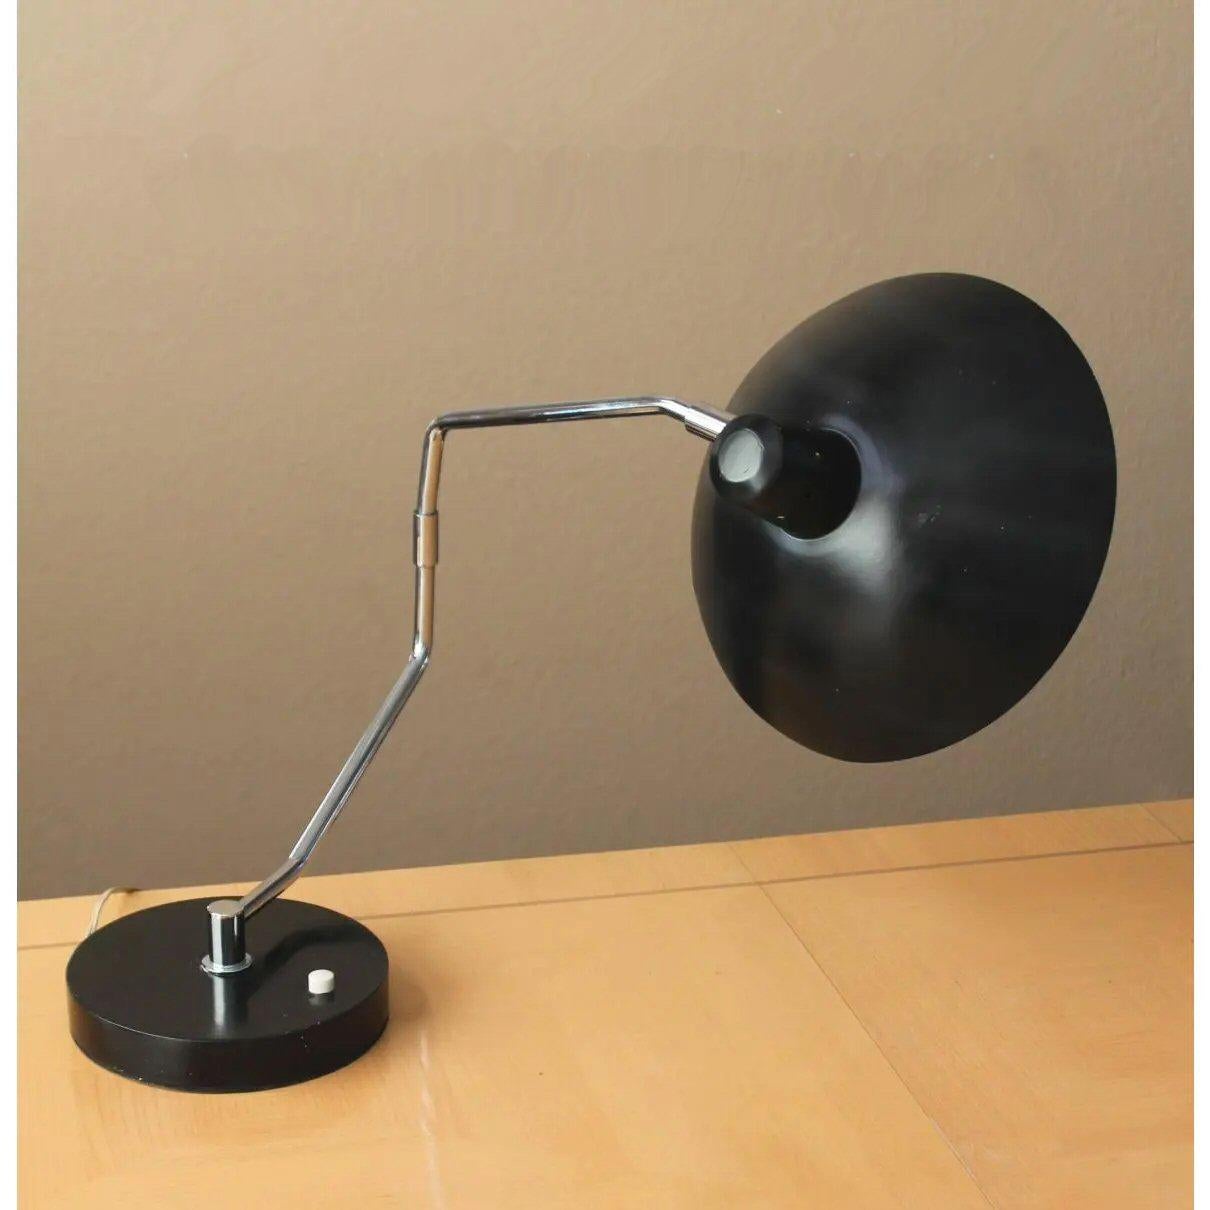 Clay Michie For Knoll Swing Arm Saucer Desk Lamp, 1950s Mid Century Good Design For Sale 1